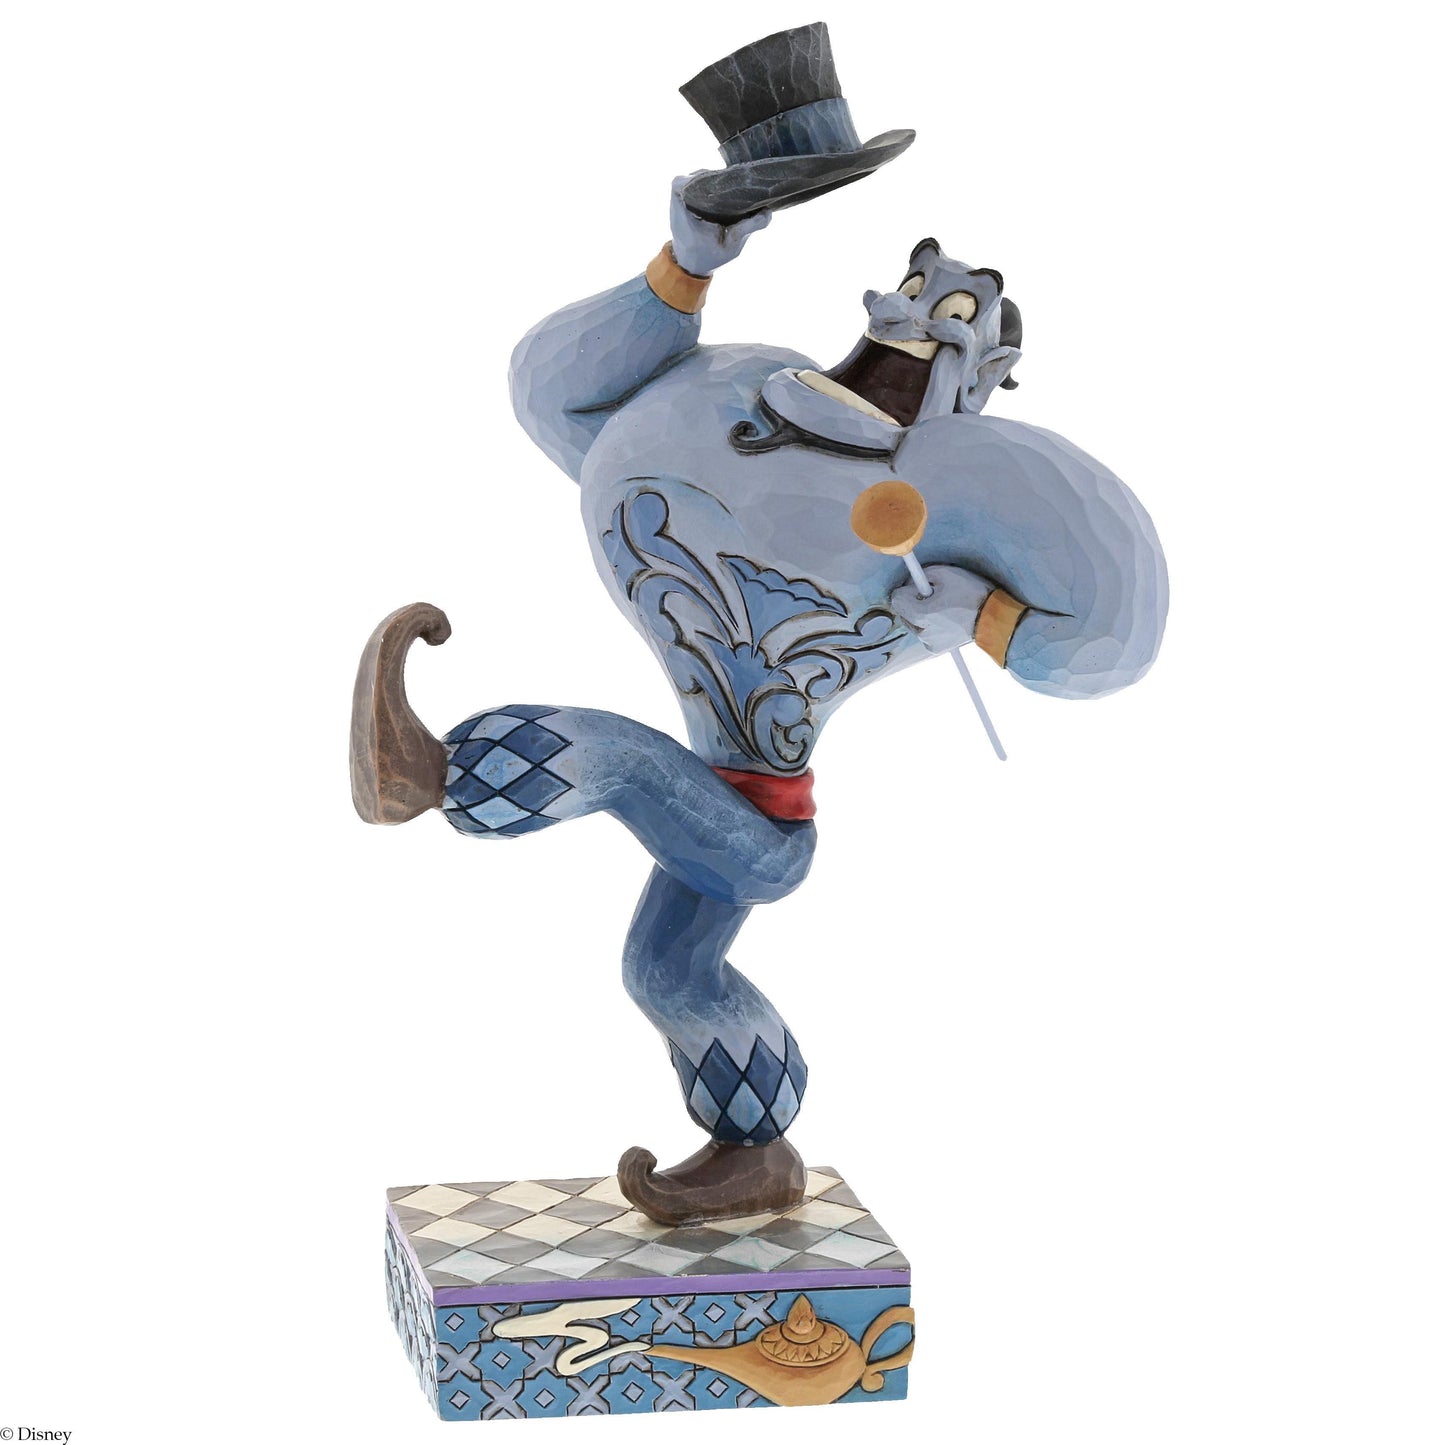 Born Showman (Genie Figurine) (Disney Traditions by Jim Shore) - Gallery Gifts Online 